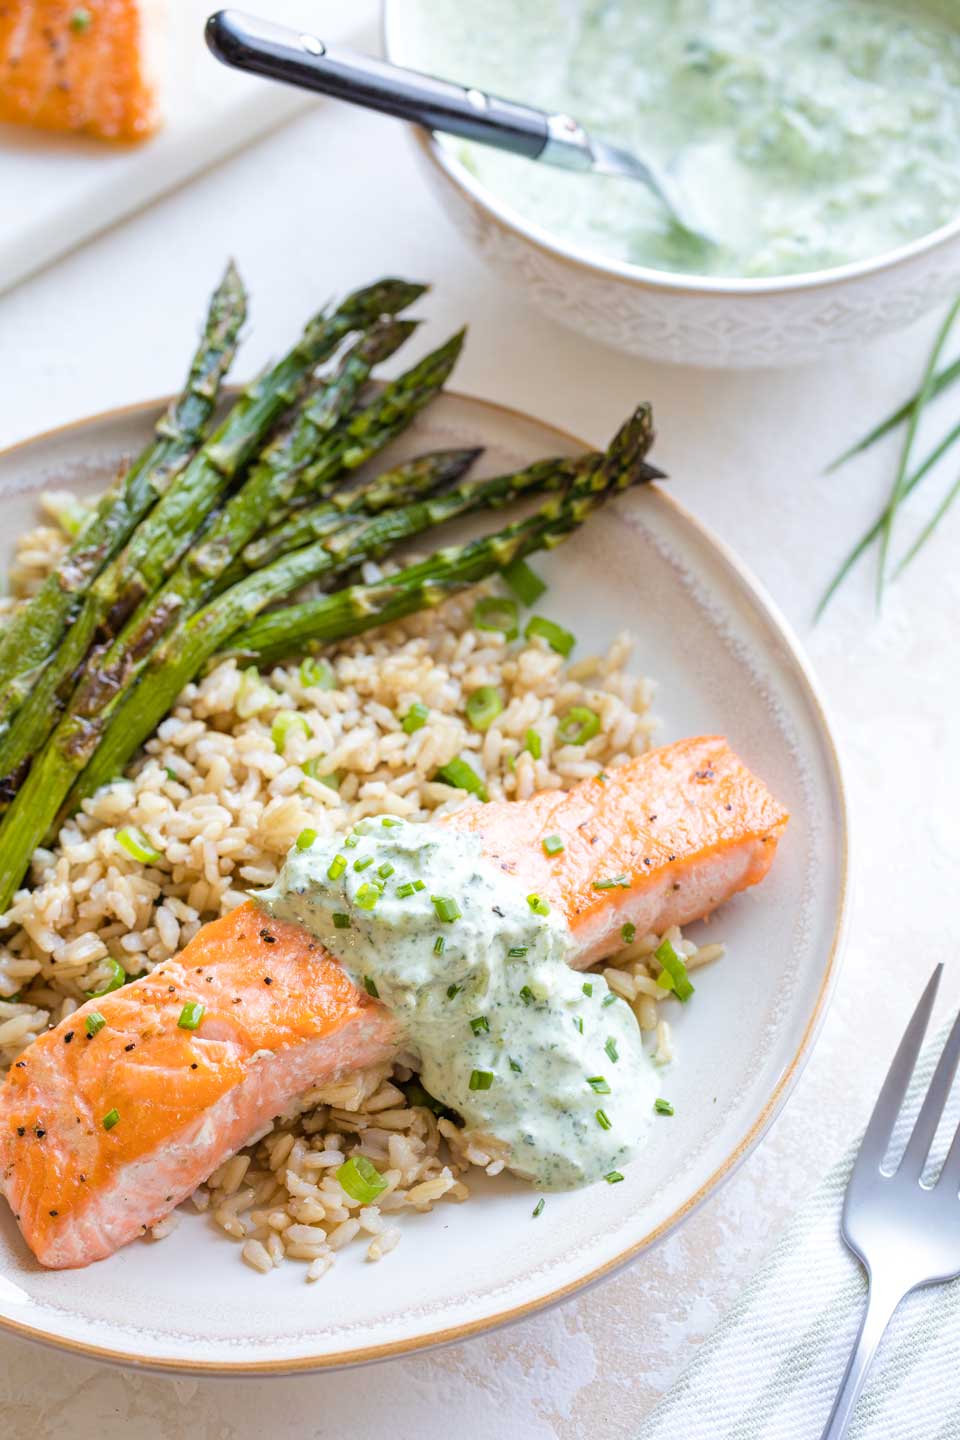 Overhead photo of the seared salmon, plated with brown rice and roasted asparagus, with a napkin, fork, and a bowl of extra tzatziki nearby.